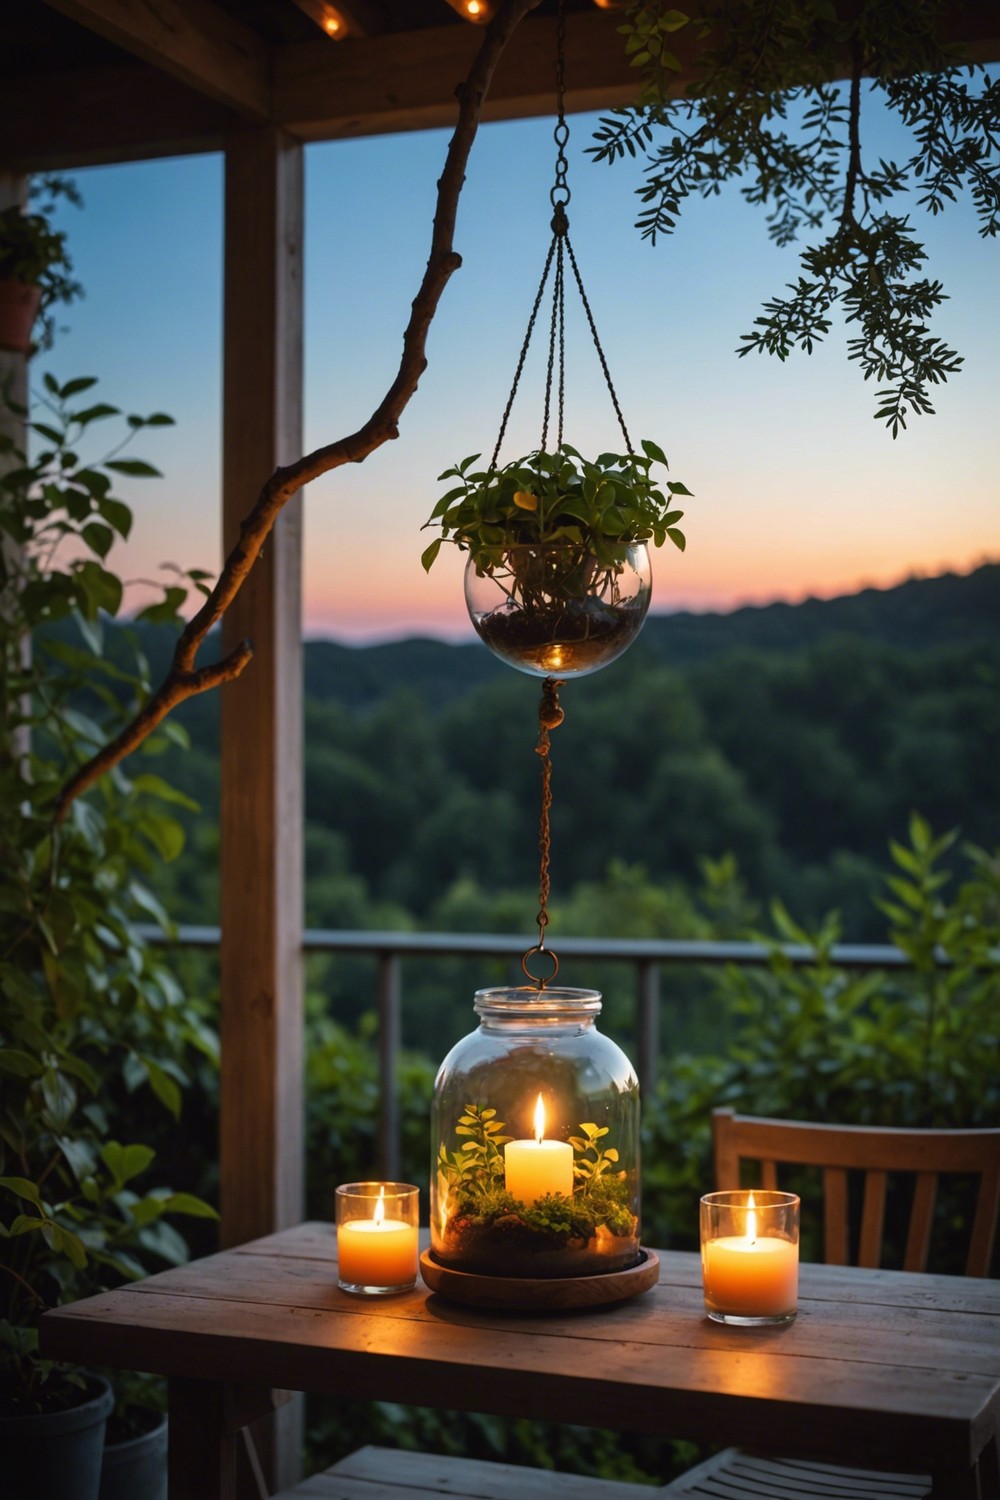 Hanging Terrariums with Candles and Greenery